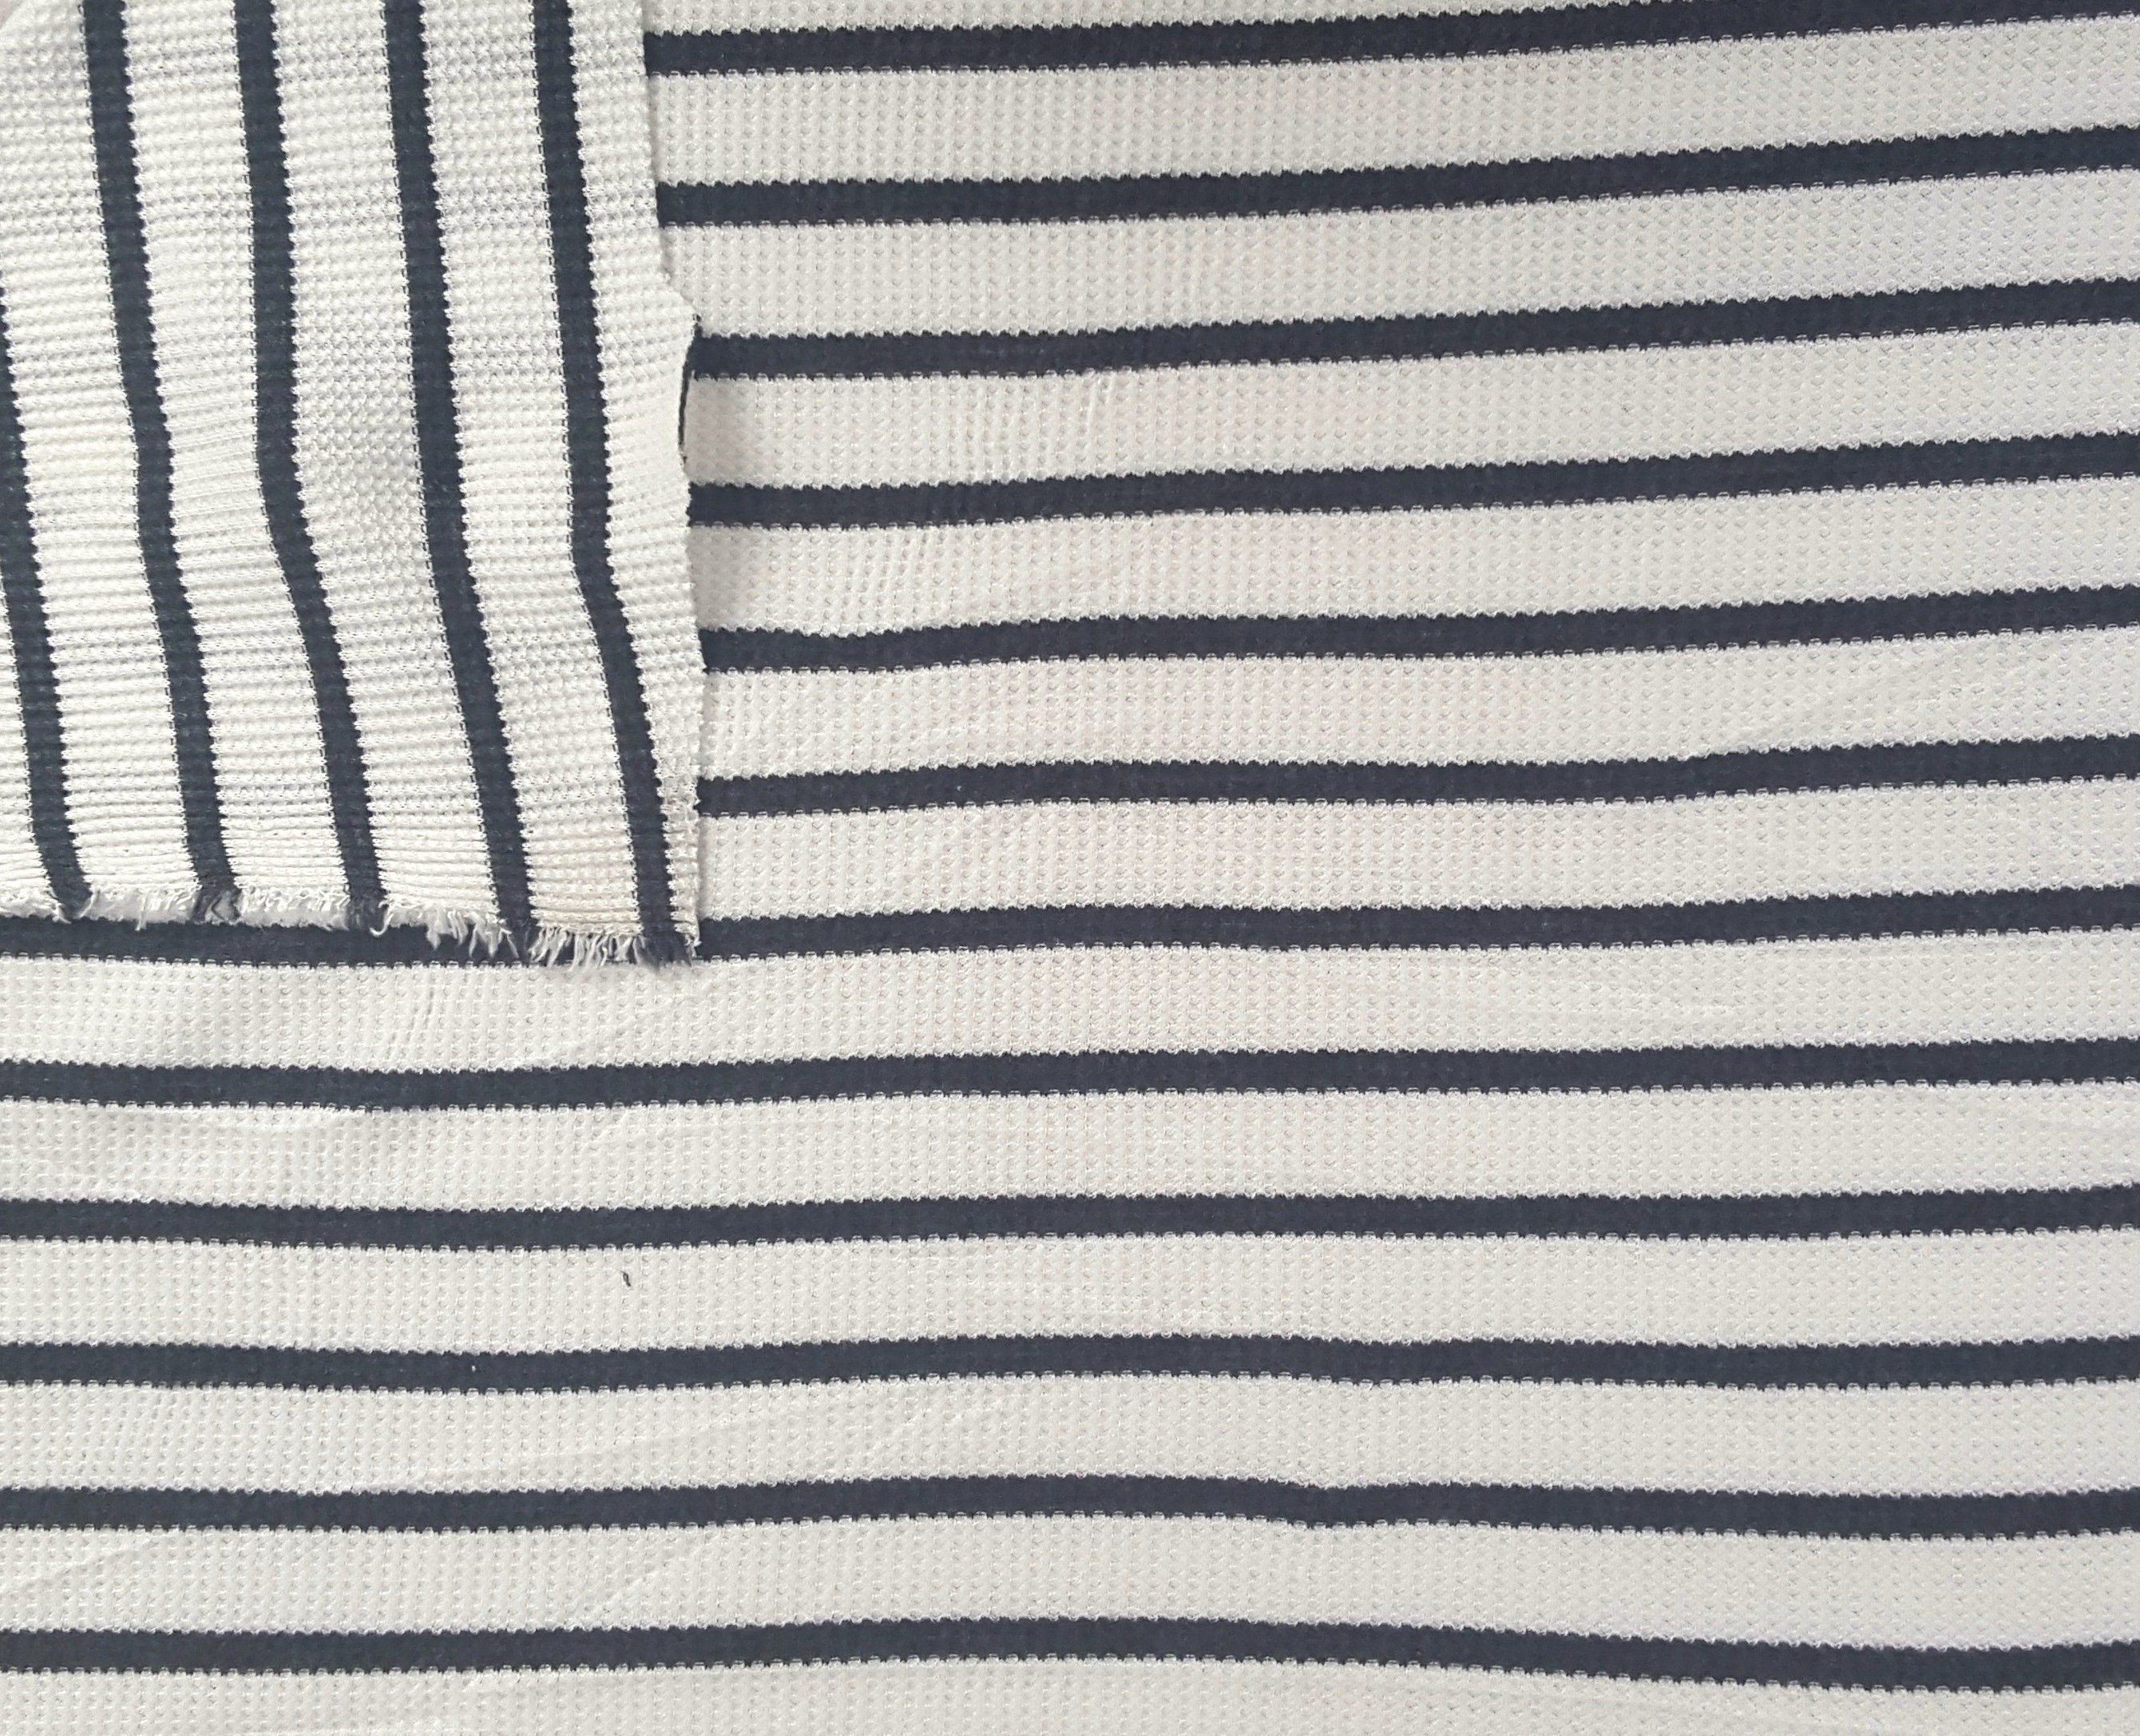 Micro Modal Spandex 3/4 Stripe Thermal Knit Fabric by - Etsy